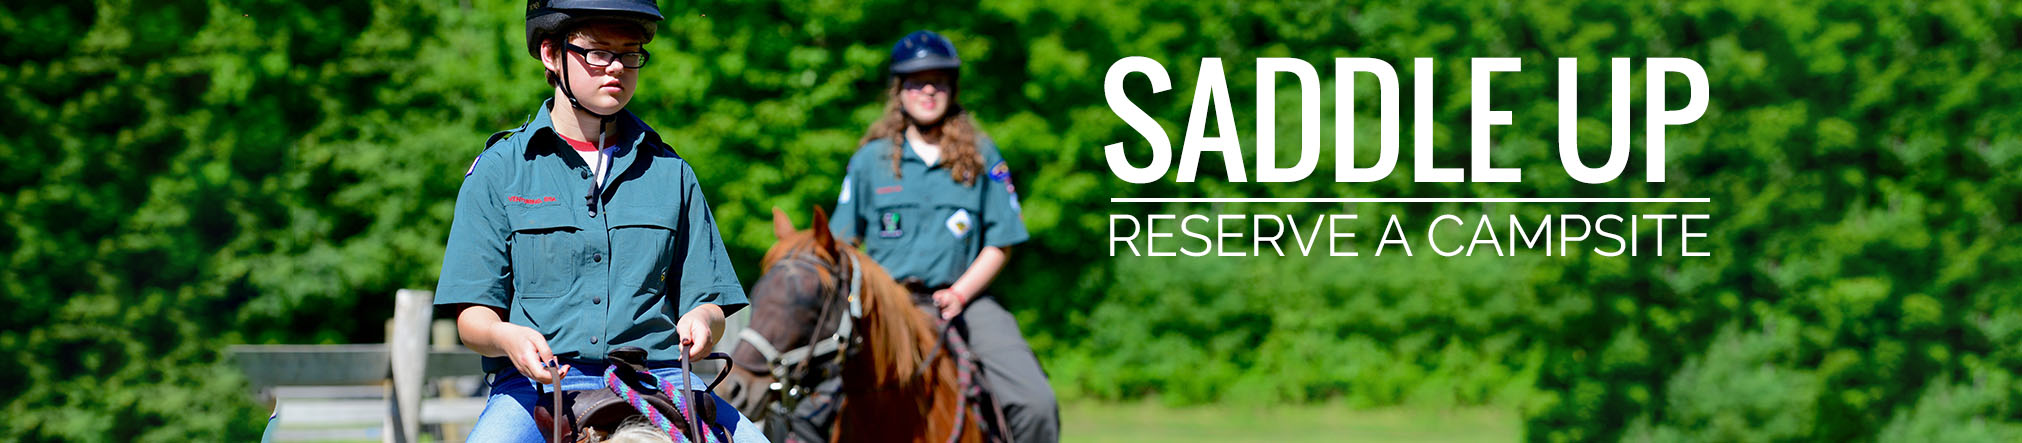 Reserve a Campsite, photo of Scouts riding horses